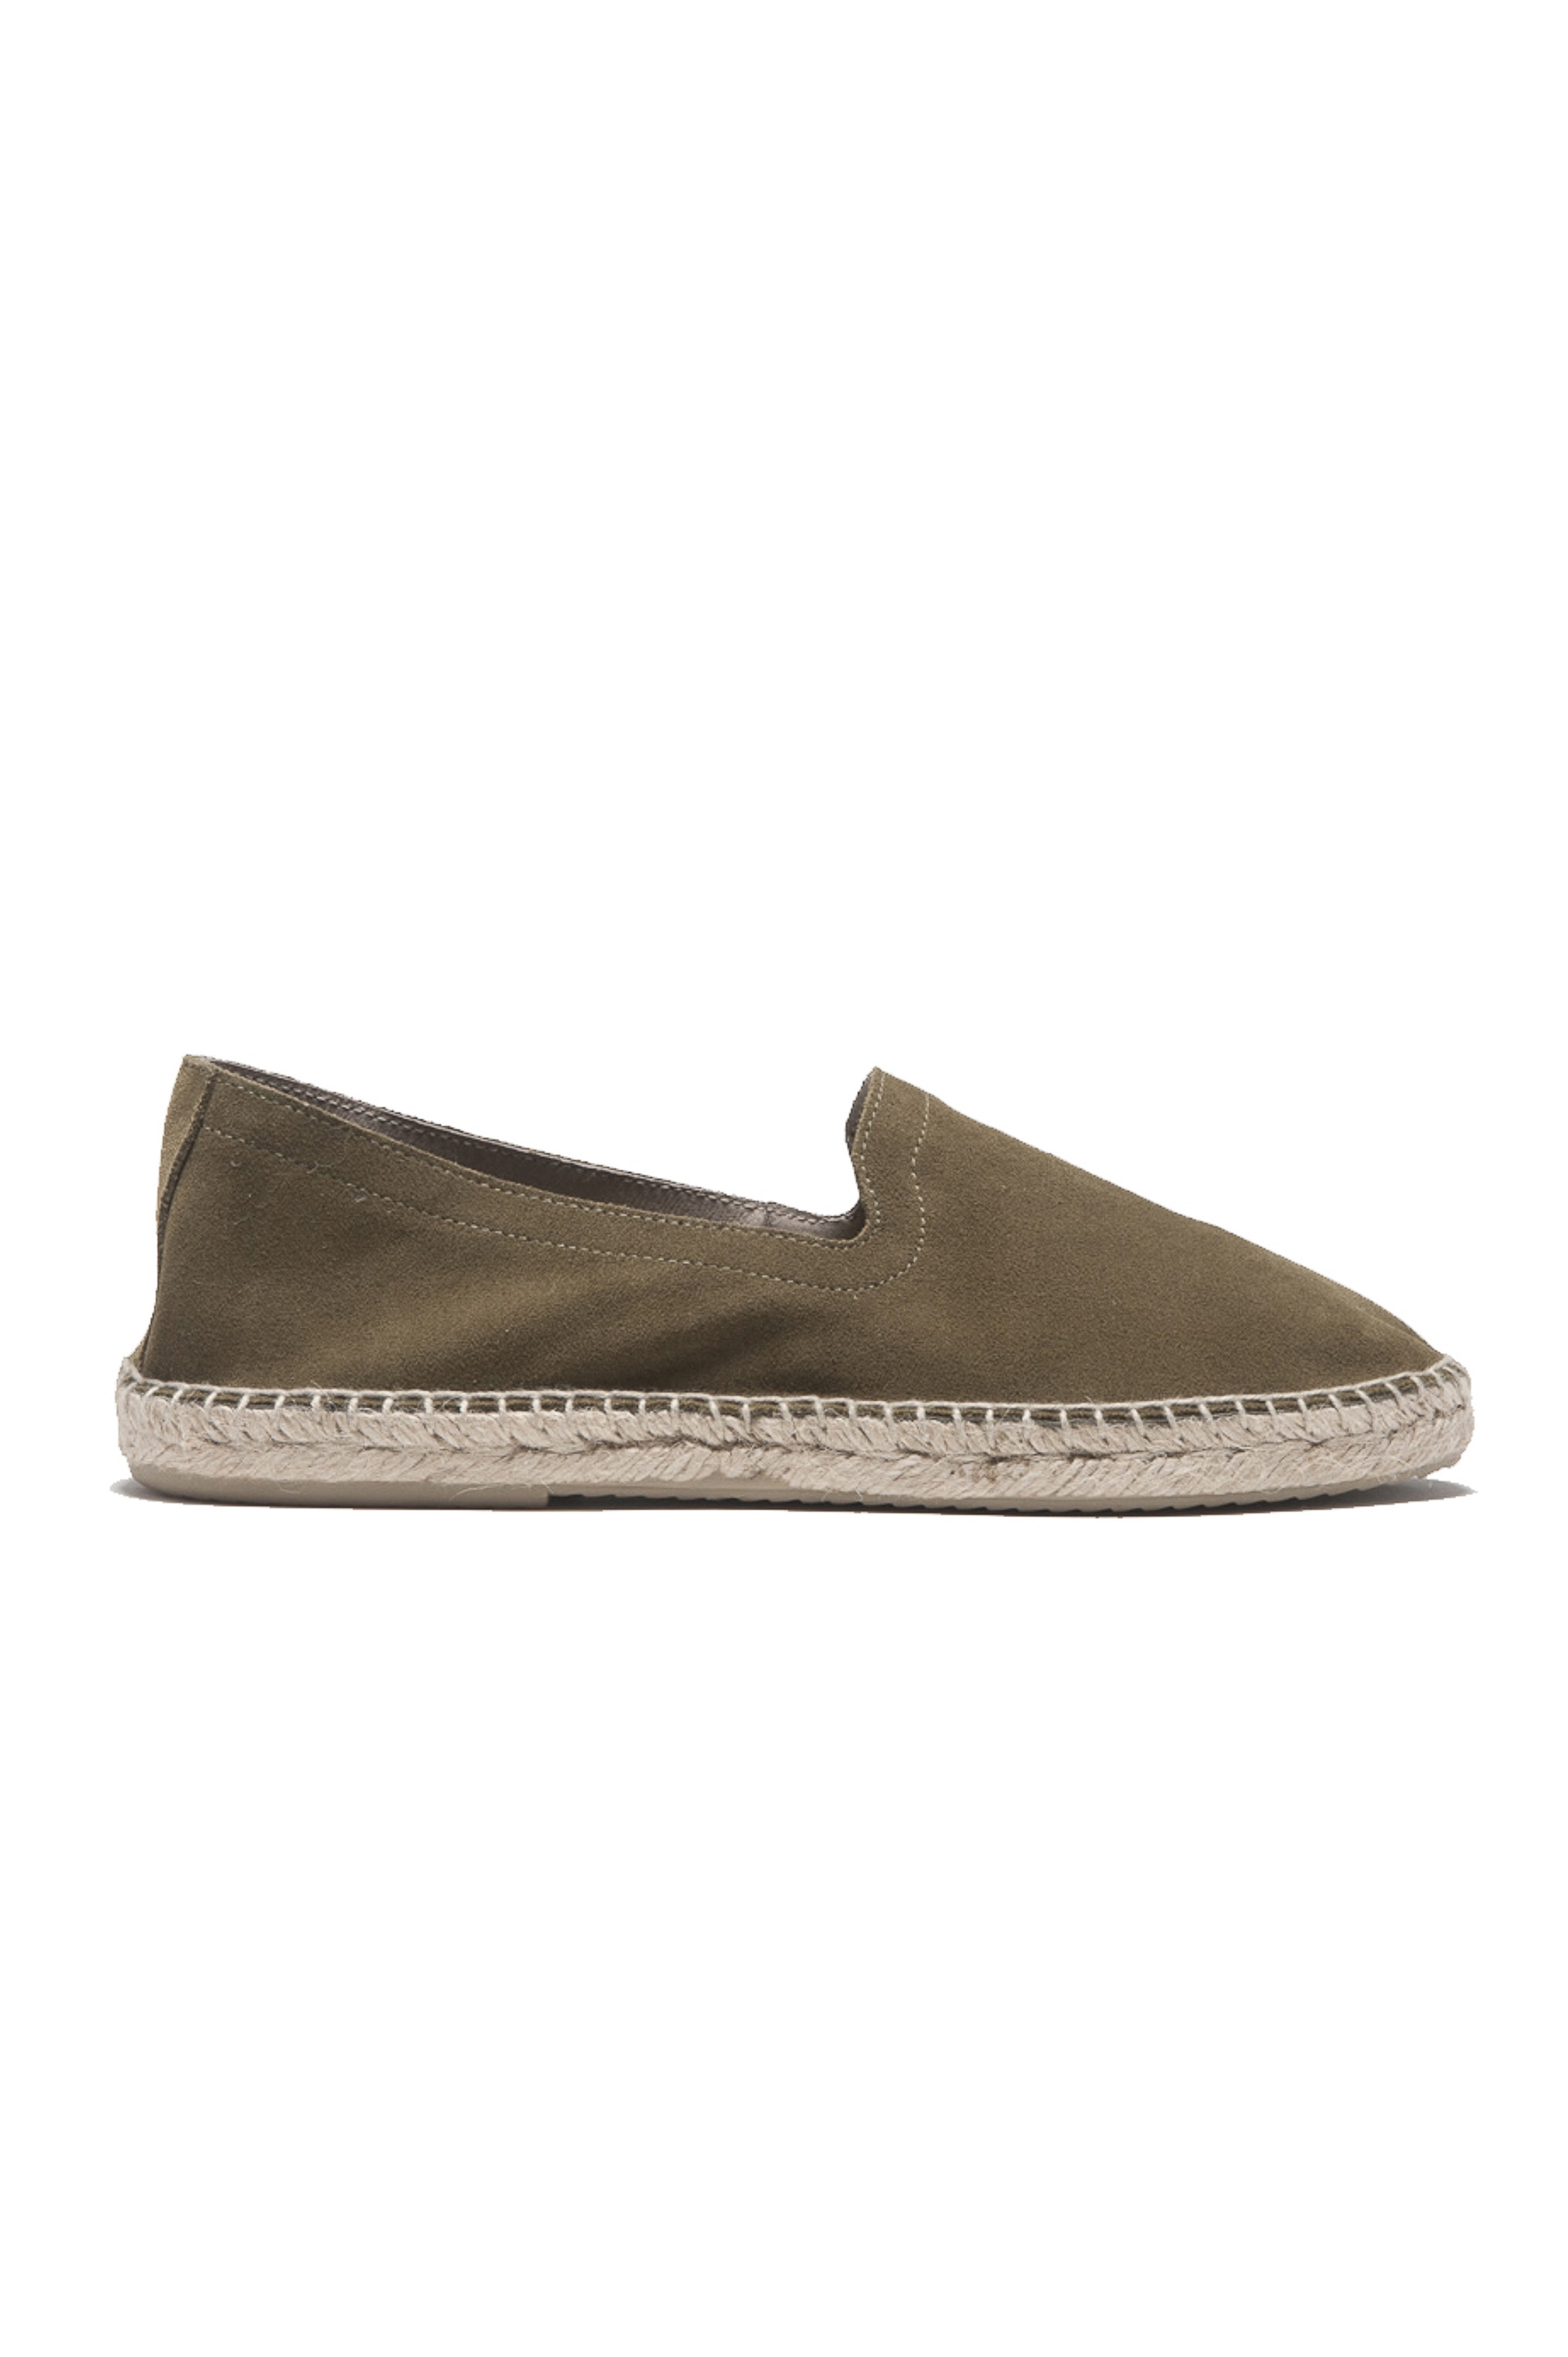 SBU 01703_2020SS Original green suede leather espadrilles with rubber sole 05